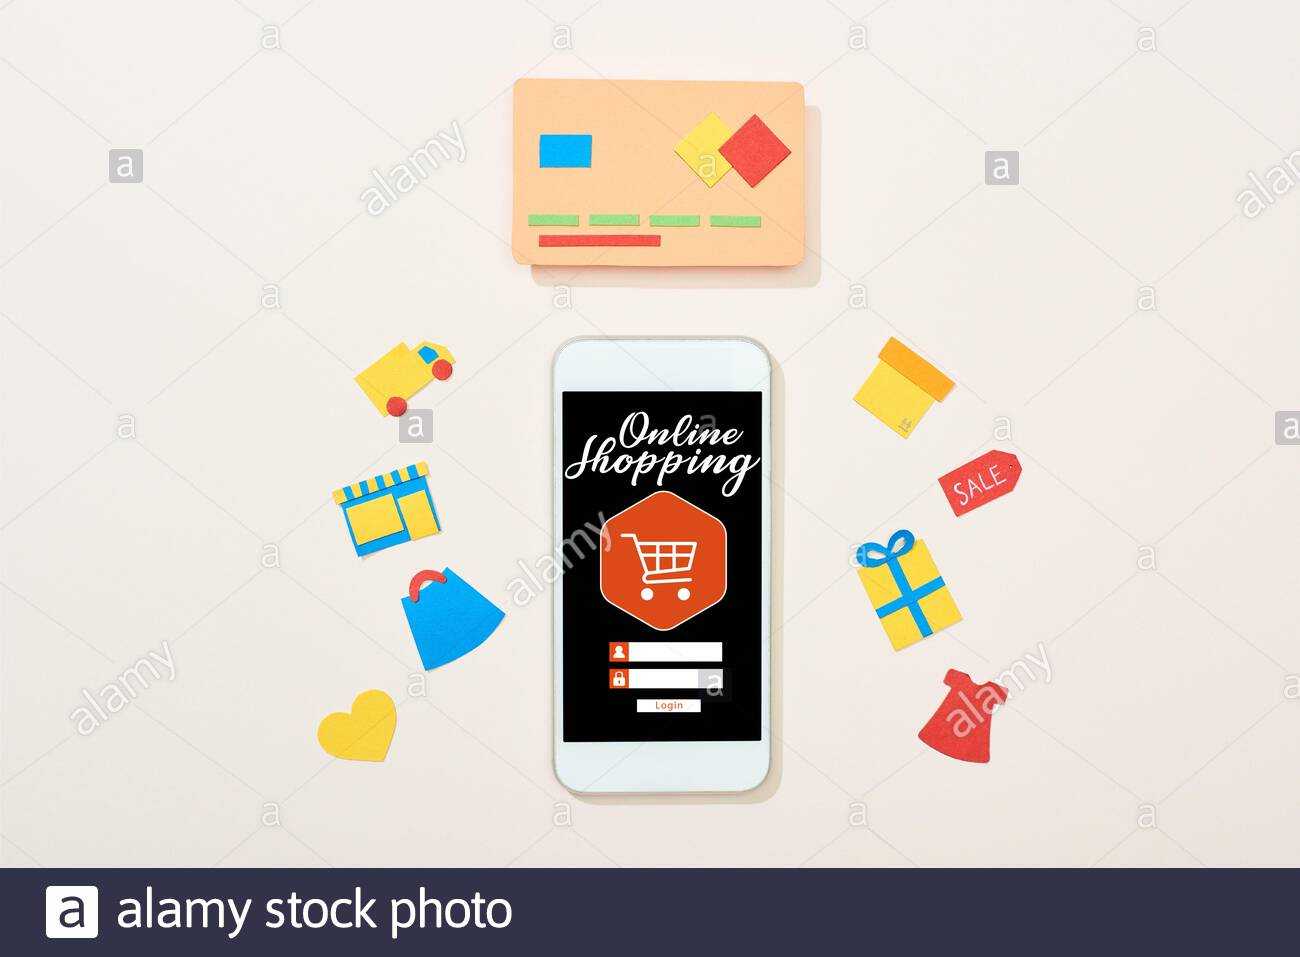 Top View Of Credit Card Template Near Icons And Smartphone Regarding Credit Card Templates For Sale